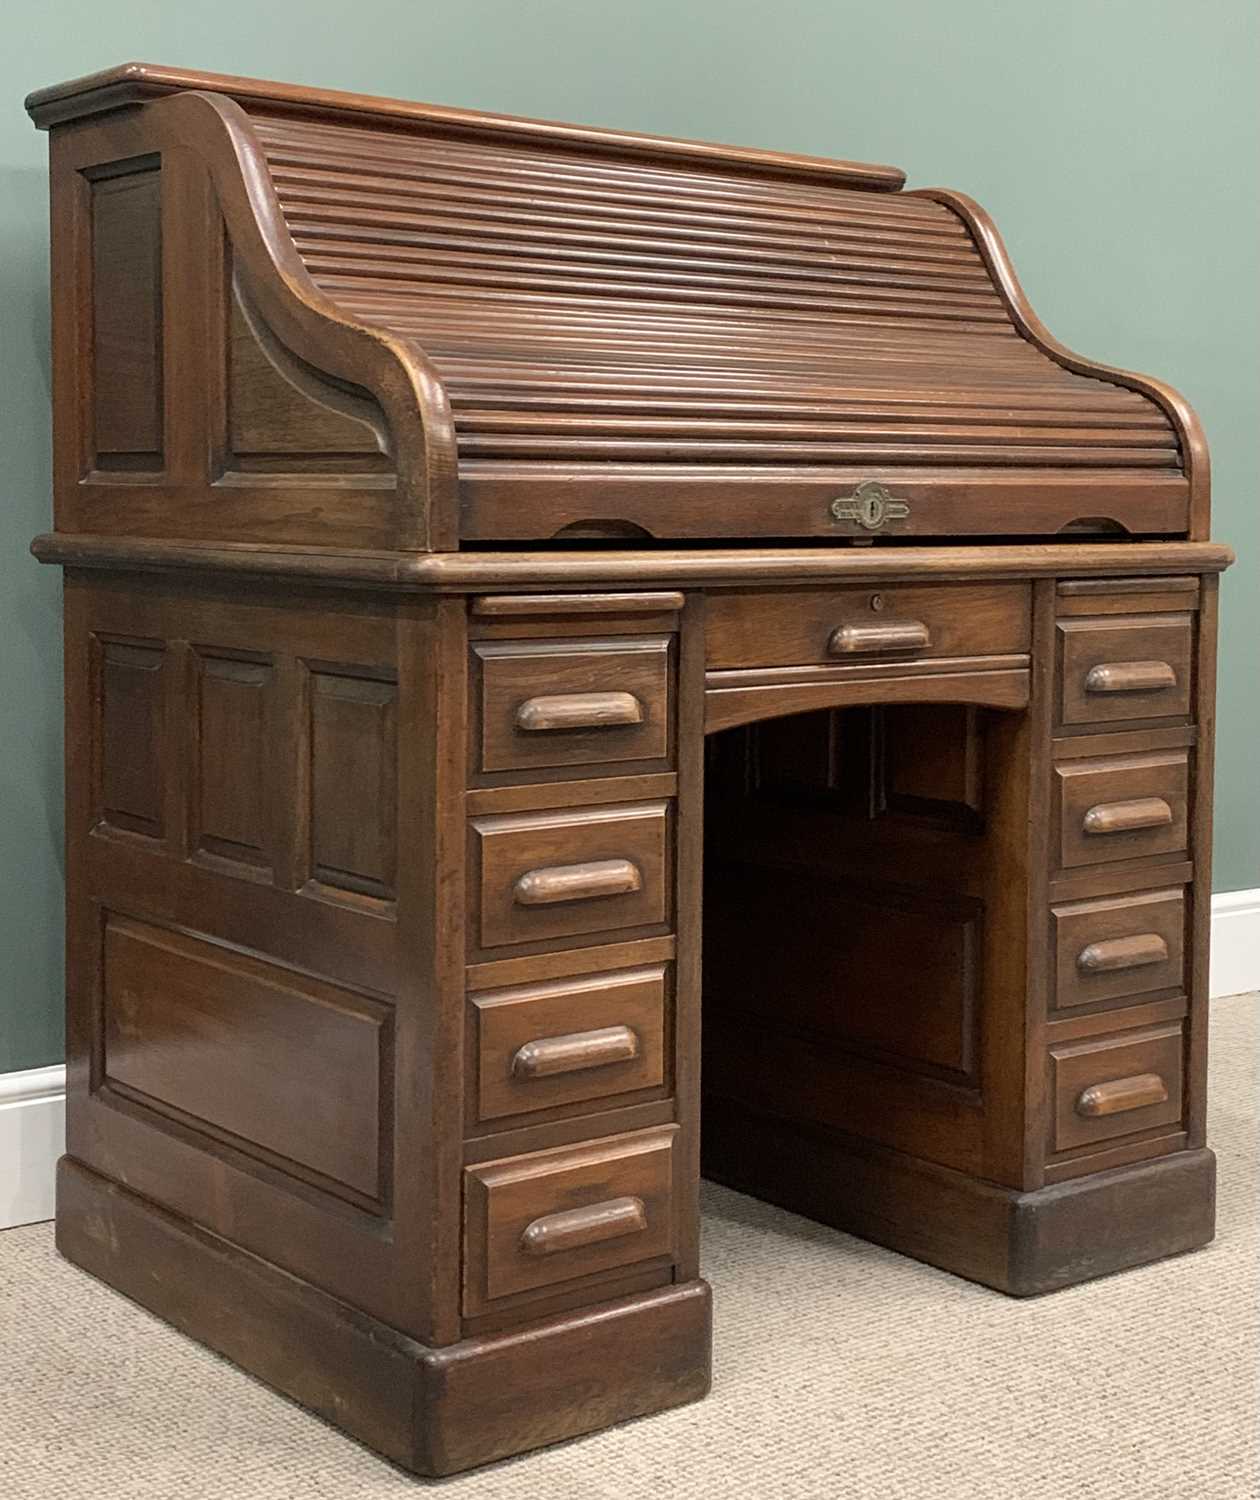 MAHOGANY ROLL TOP DESK BY THOMAS TURNER `A4 Holburn Viaduct, Derby Desk, London, Made in America` - Image 2 of 9